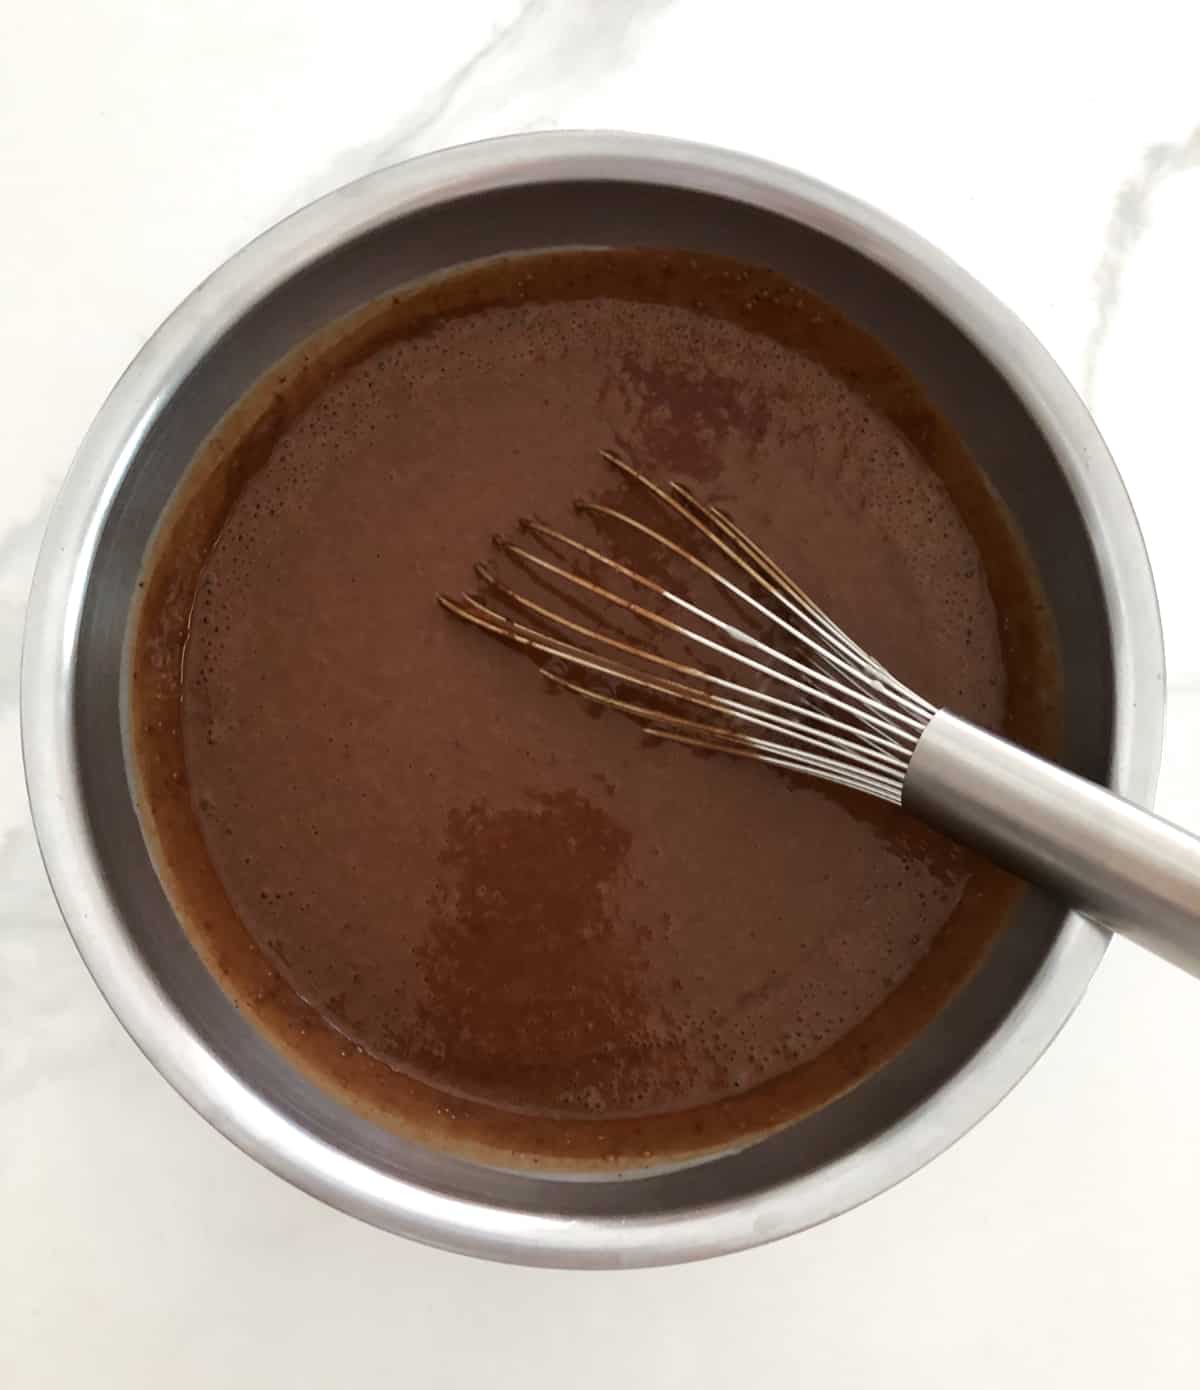 Unfrozen chocolate gelato in mixing bowl with whisk.